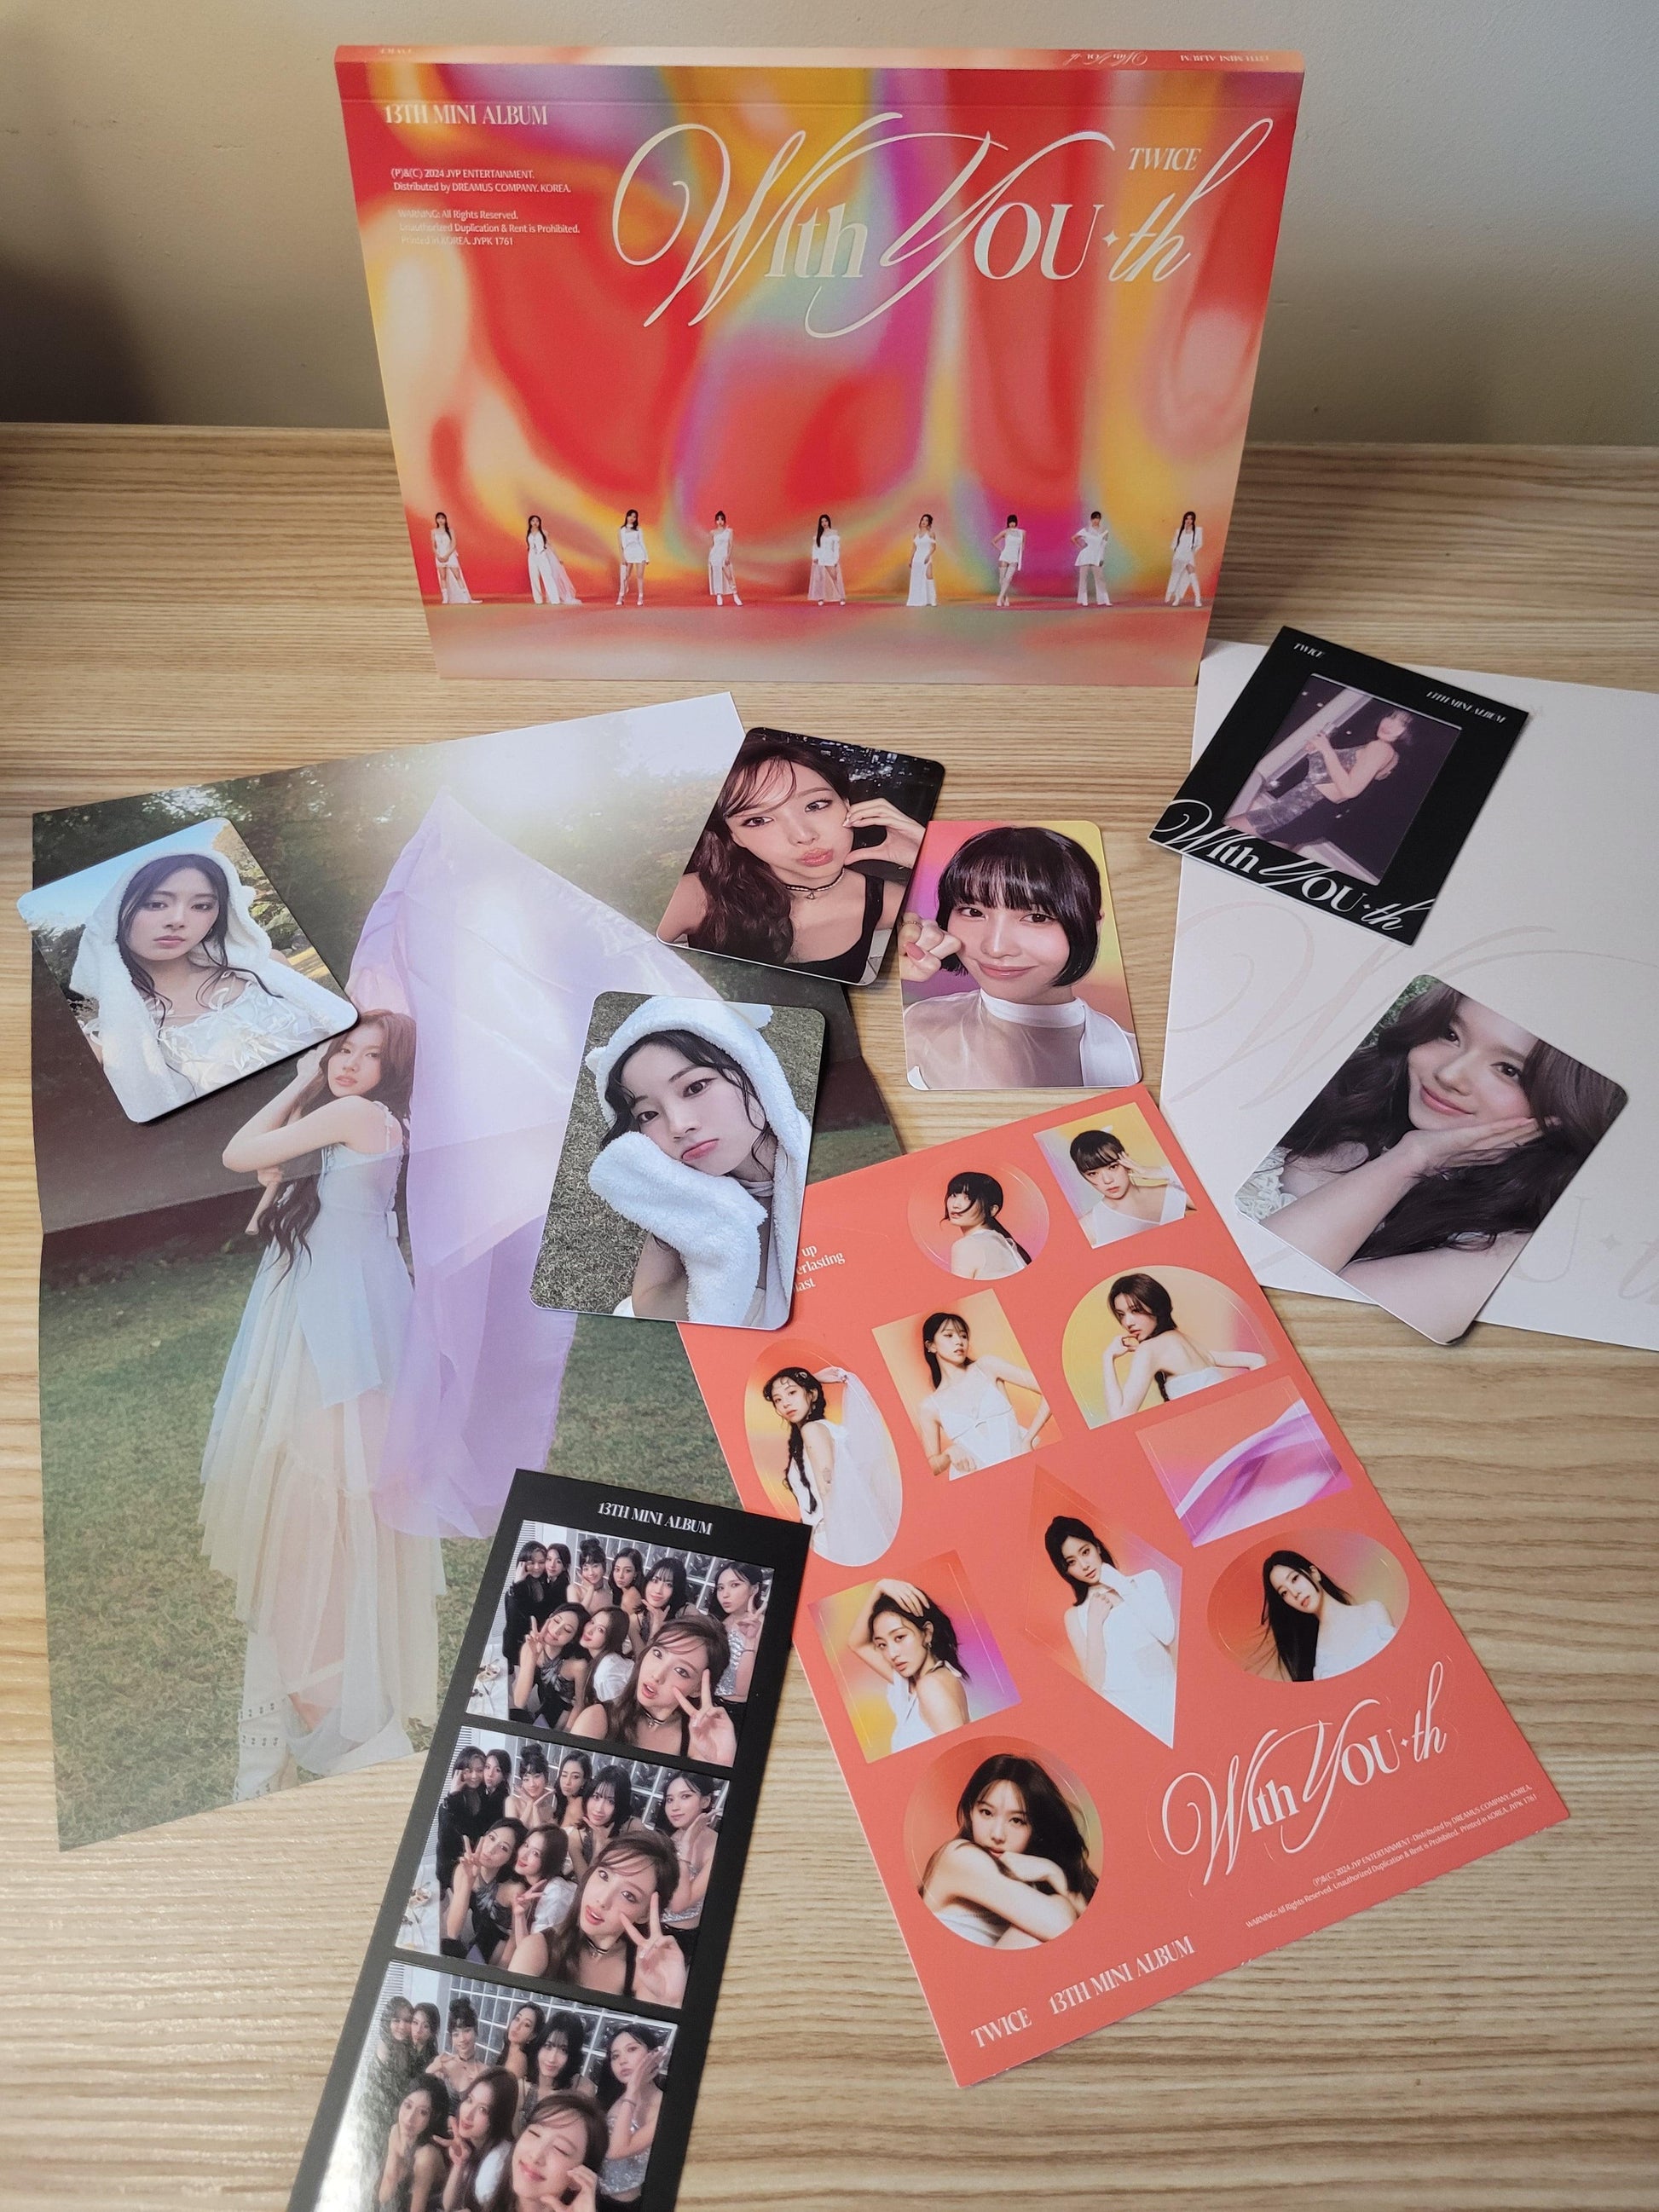 [UNBOXING] TWICE - [With YOU-th] (Blast Vers.) - KAEPJJANG SHOP (캡짱 숍)